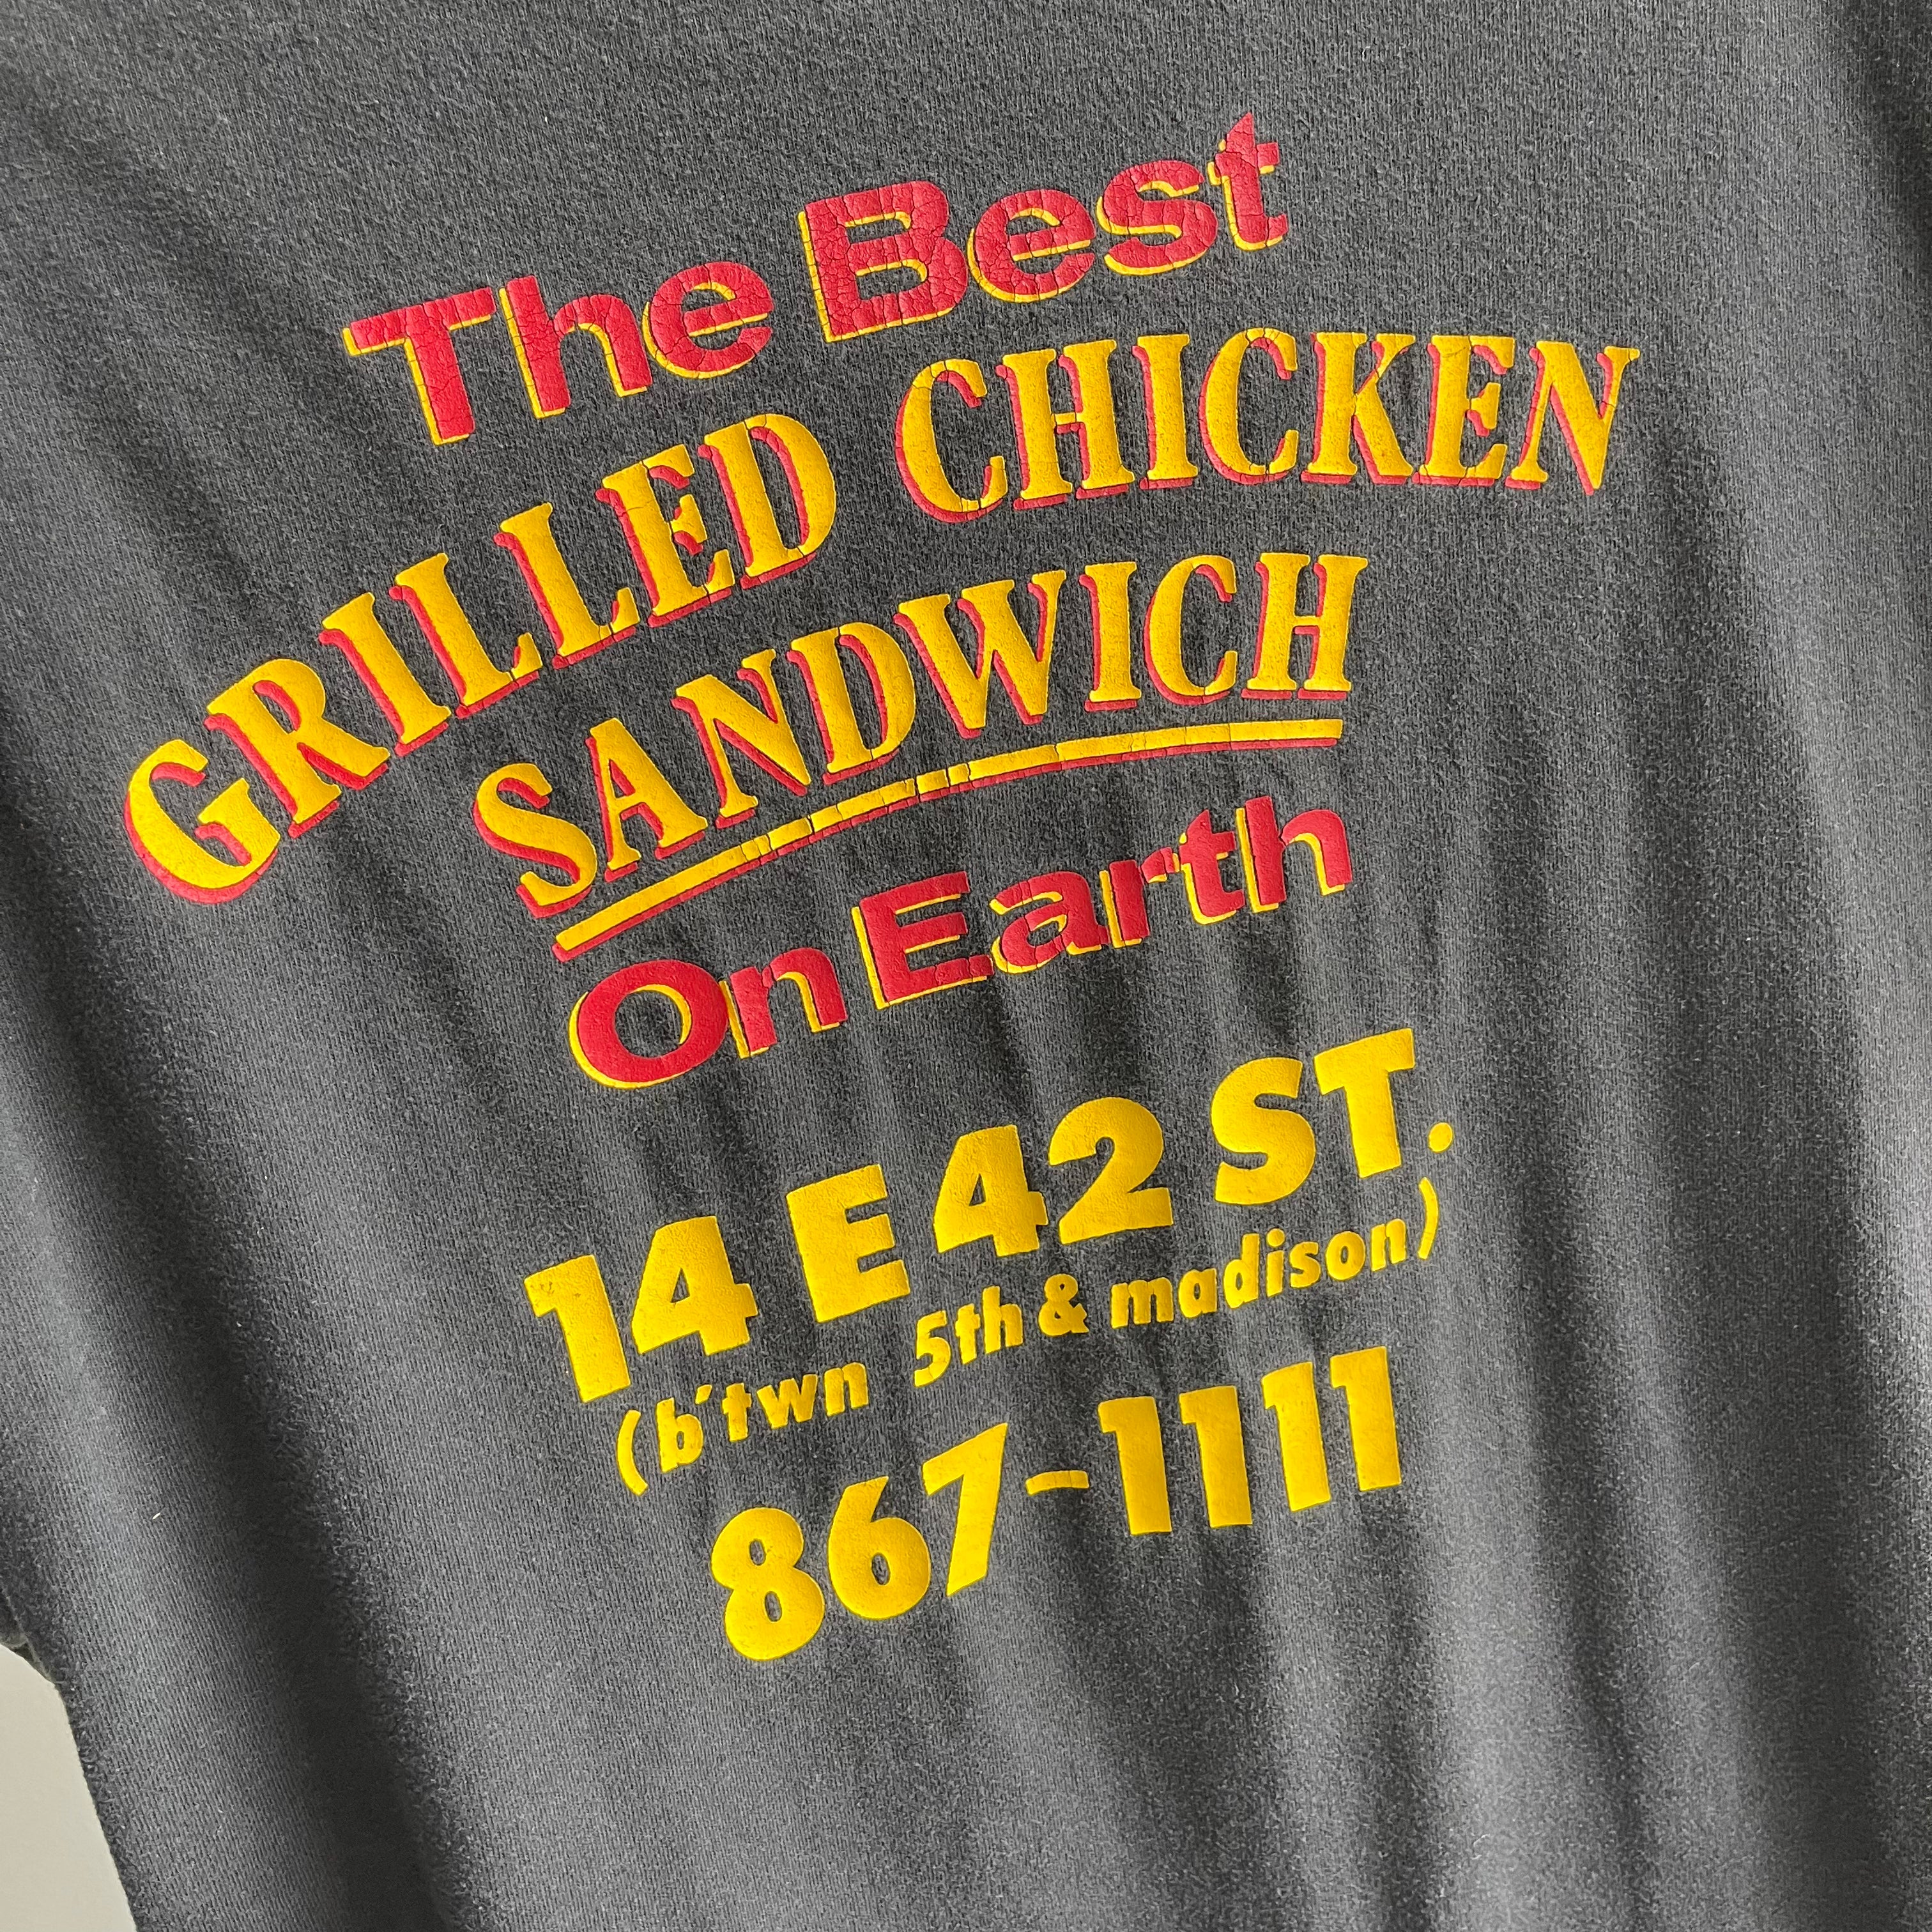 1980s Grilled Chicken Sammie T-Shirt printed on a Harley Blank